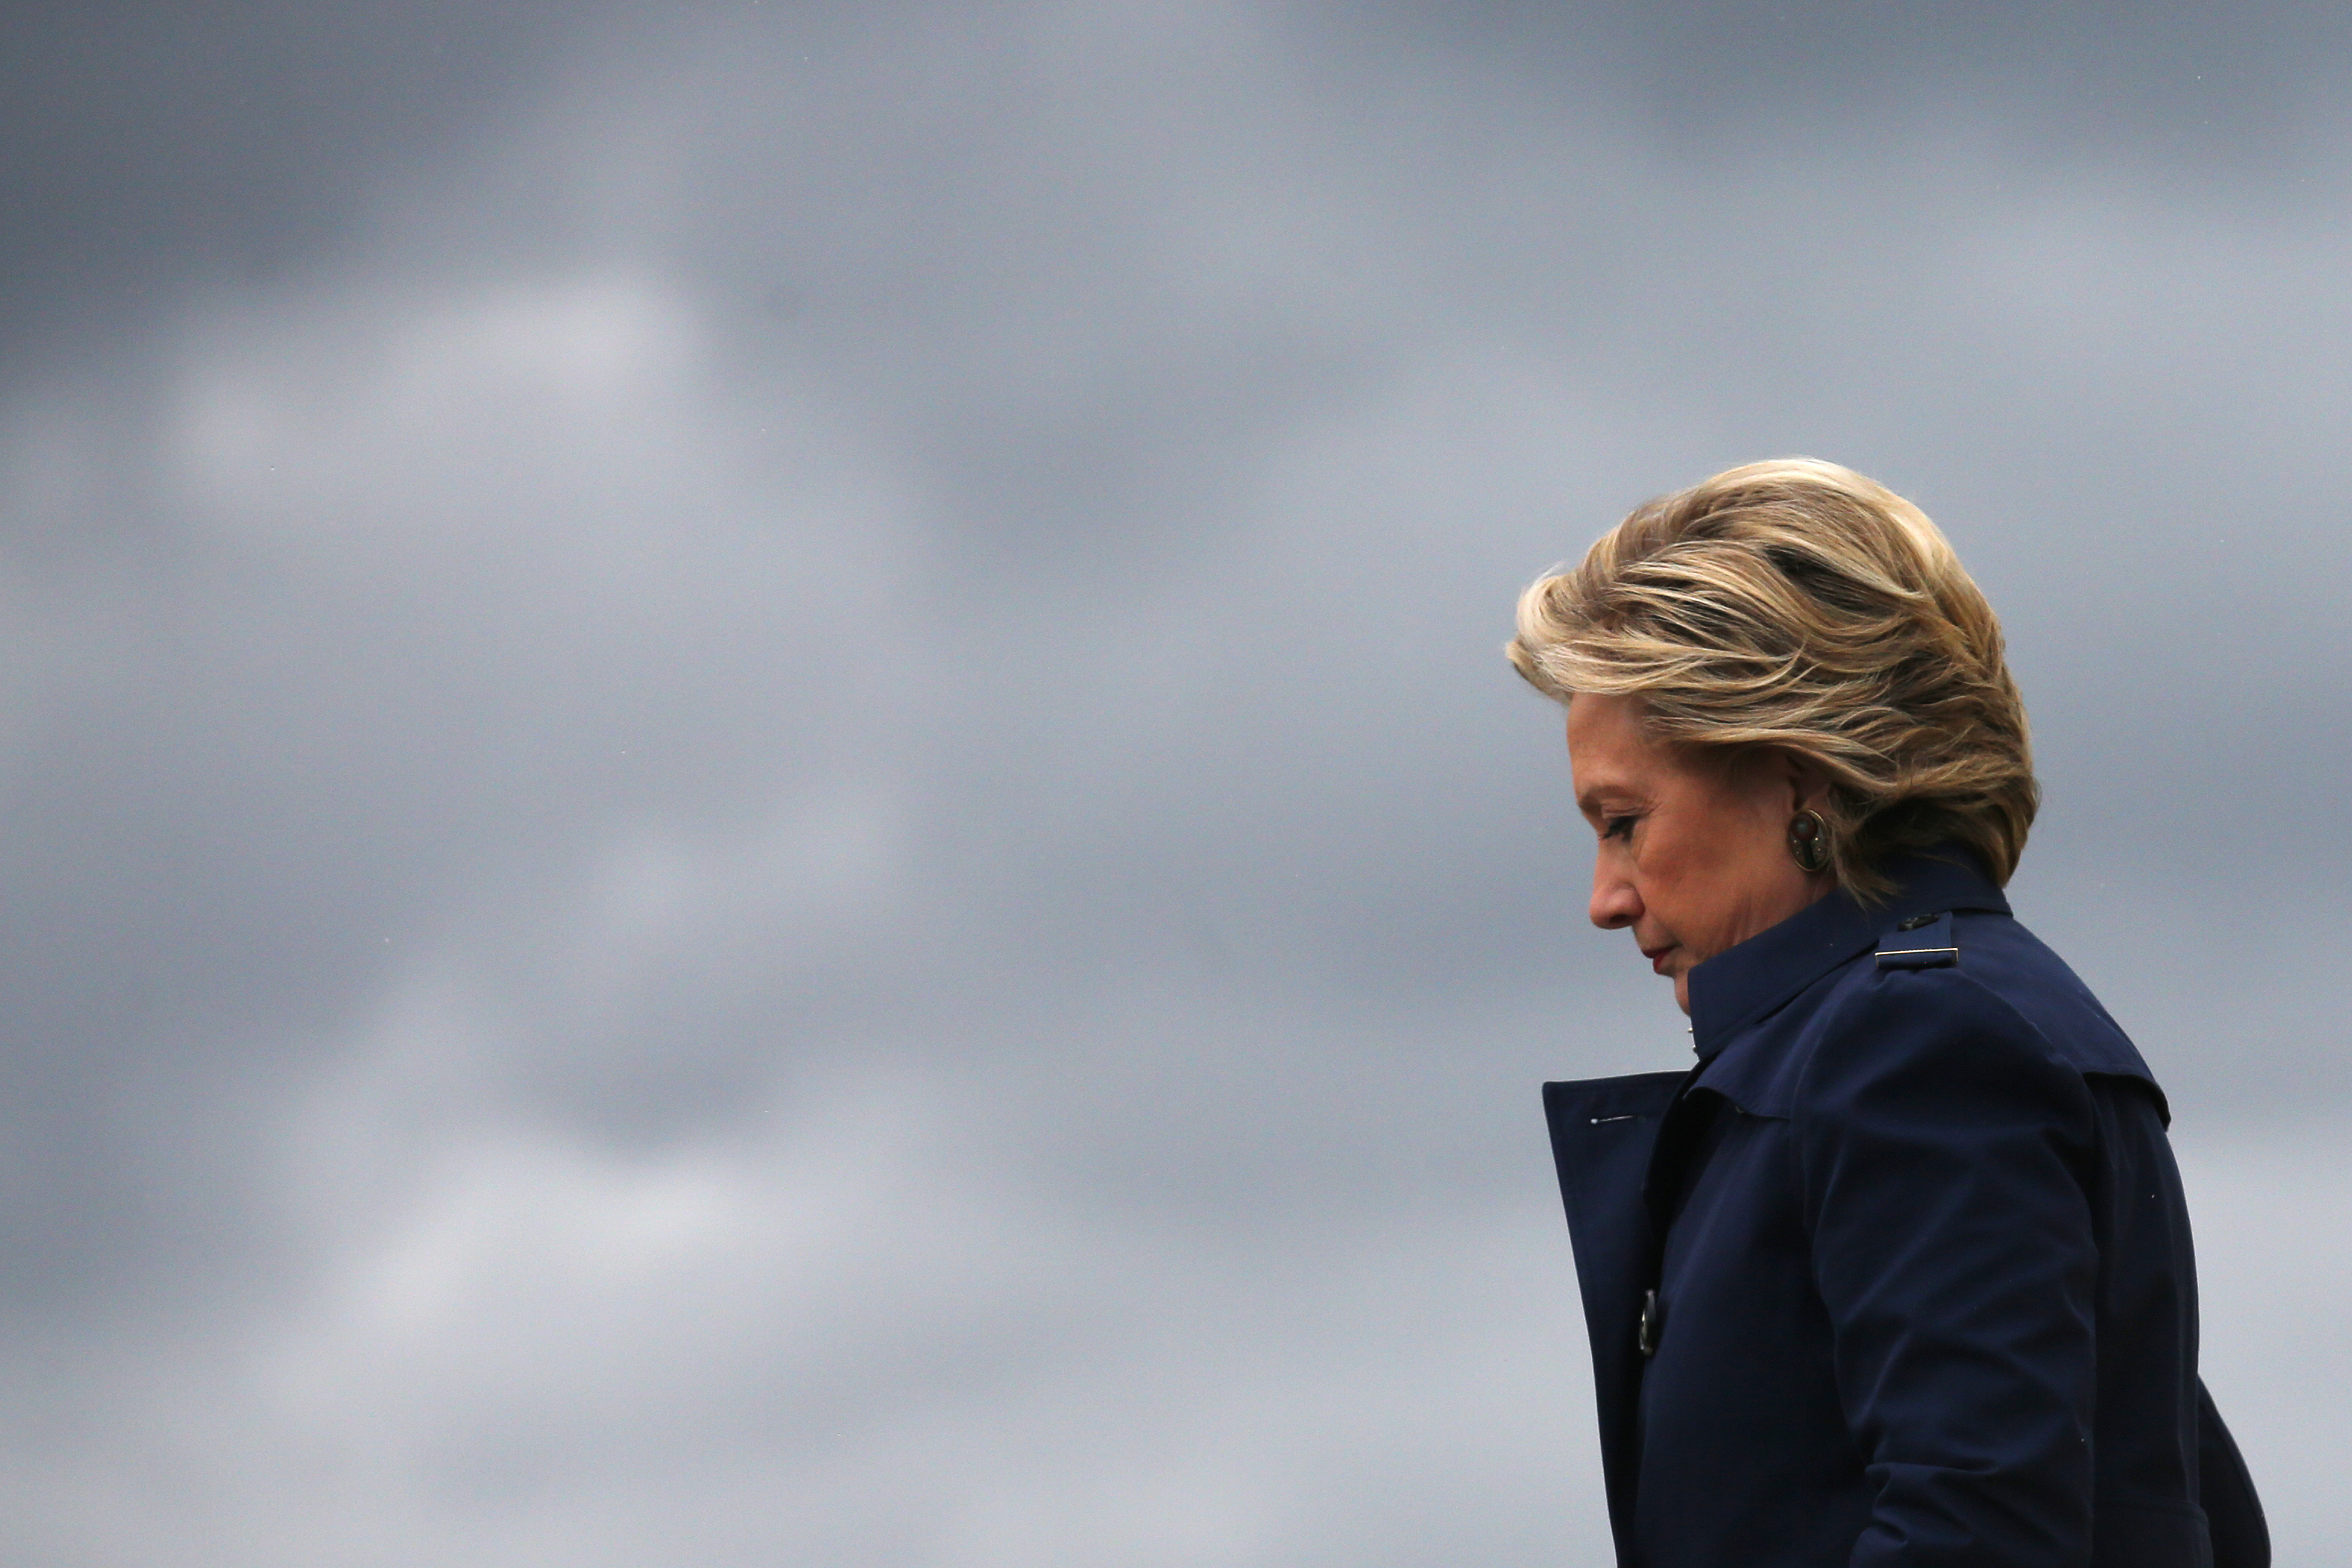 Stormy weather for the Democratic presidential nominee.